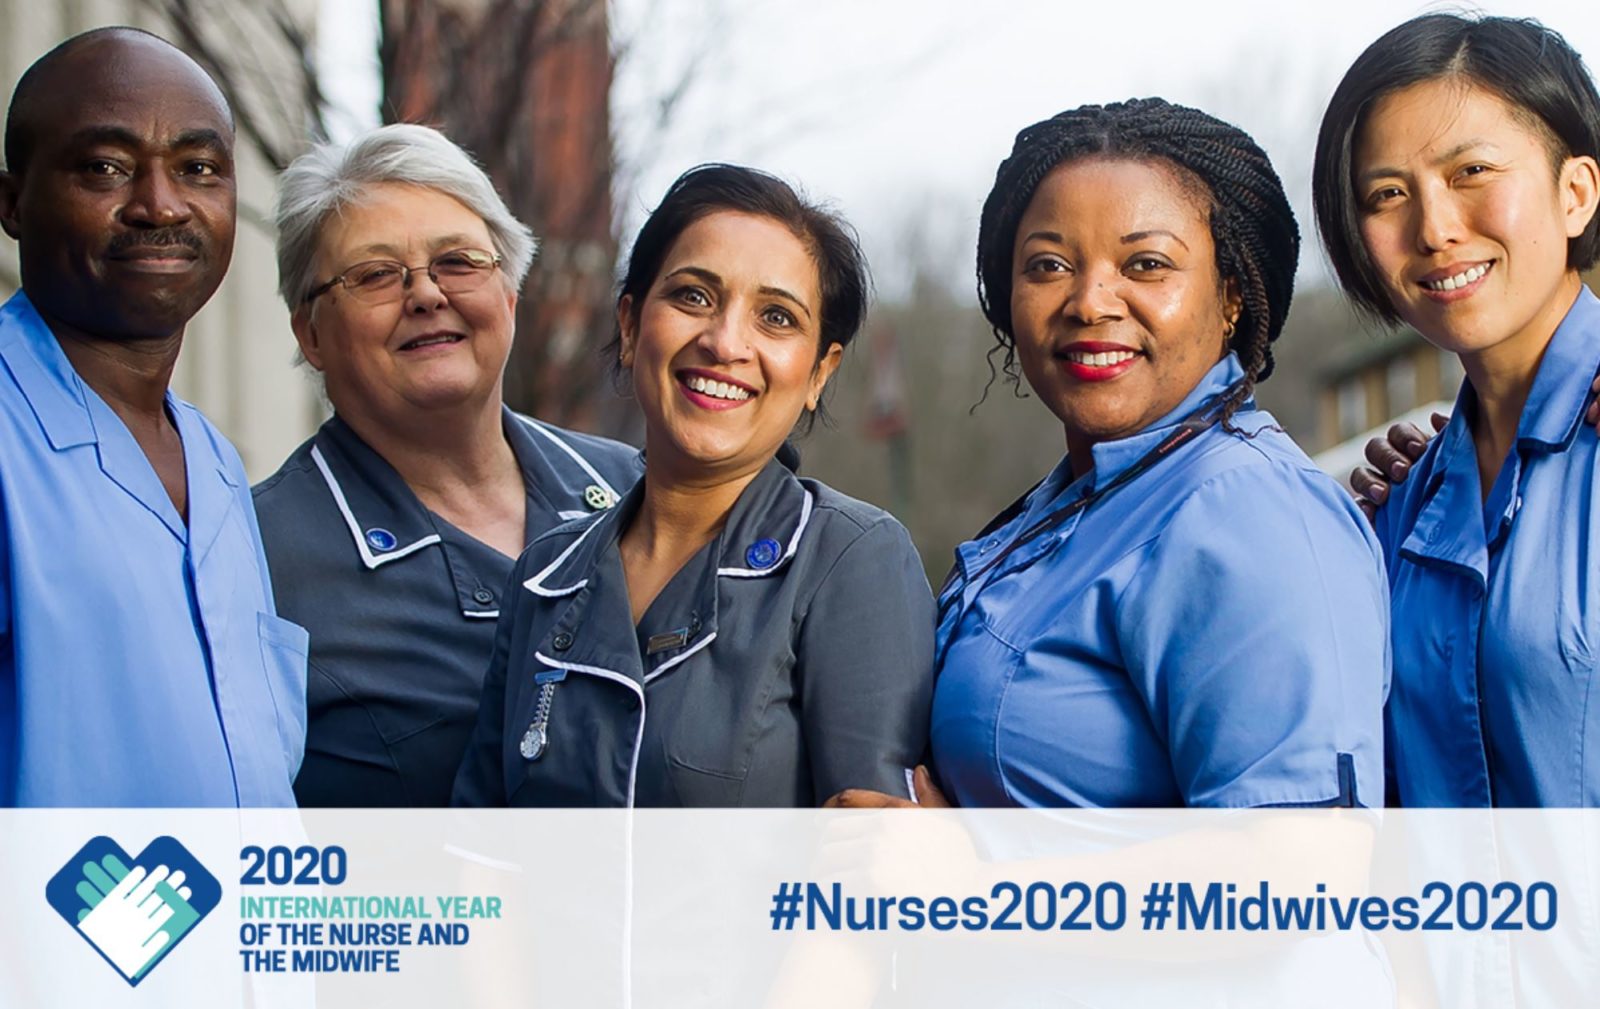 five nurses, different races and genders, with banner for 2020 the international year of the nurse and mid-wife